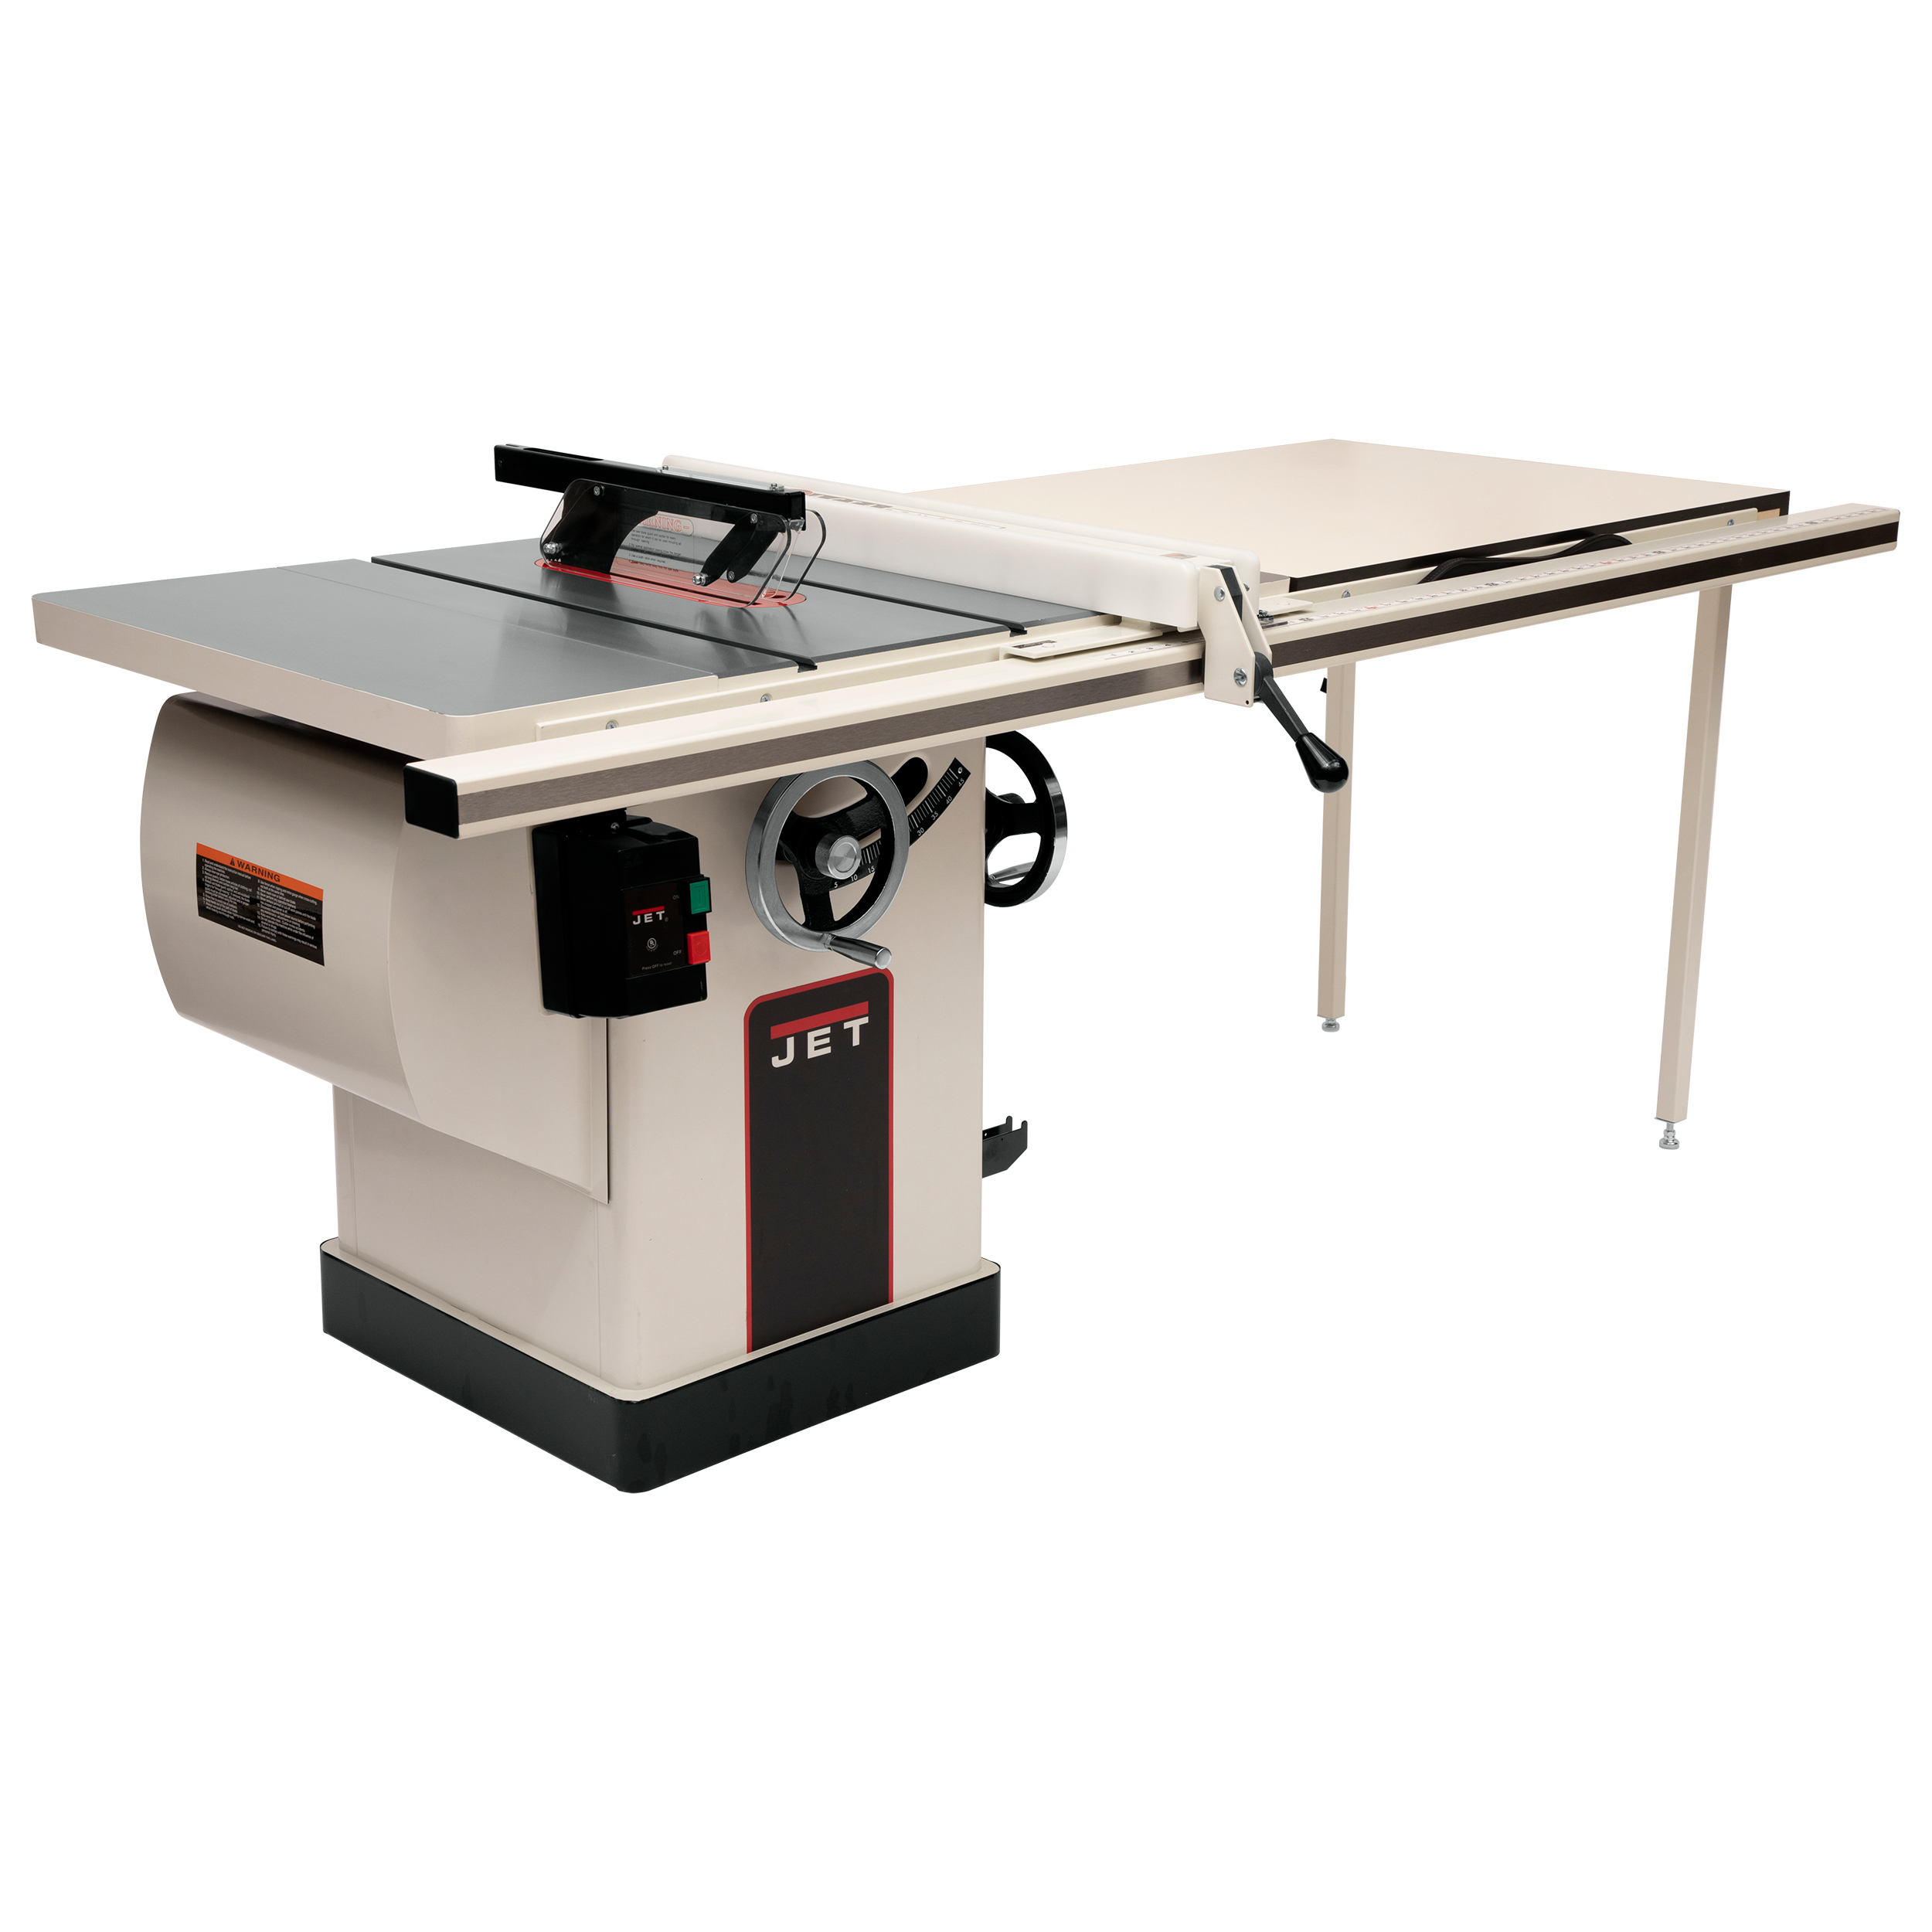 Xactasaw Deluxe Table Saw 3hp, 1ph, 50" Rip